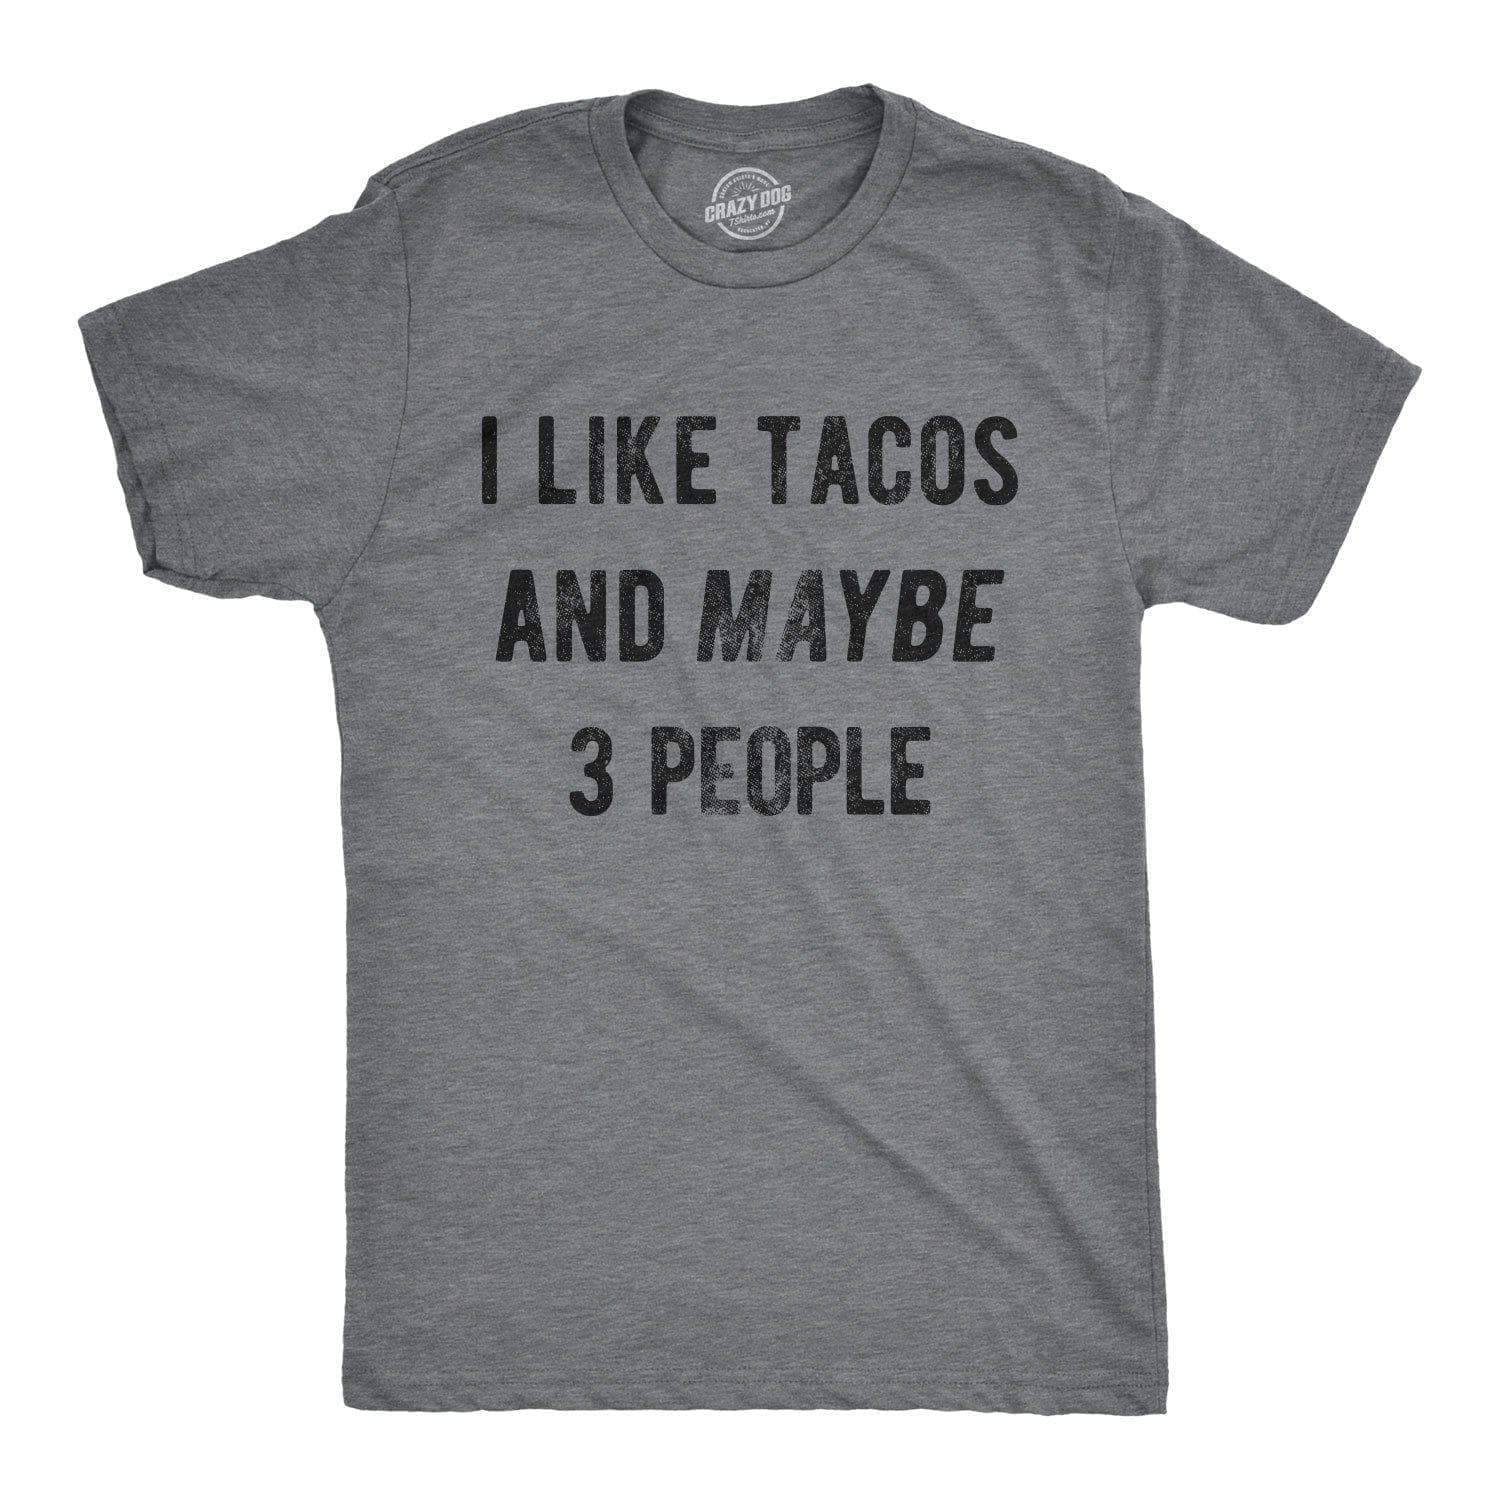 I Like Tacos And Maybe 3 People Men's Tshirt  -  Crazy Dog T-Shirts